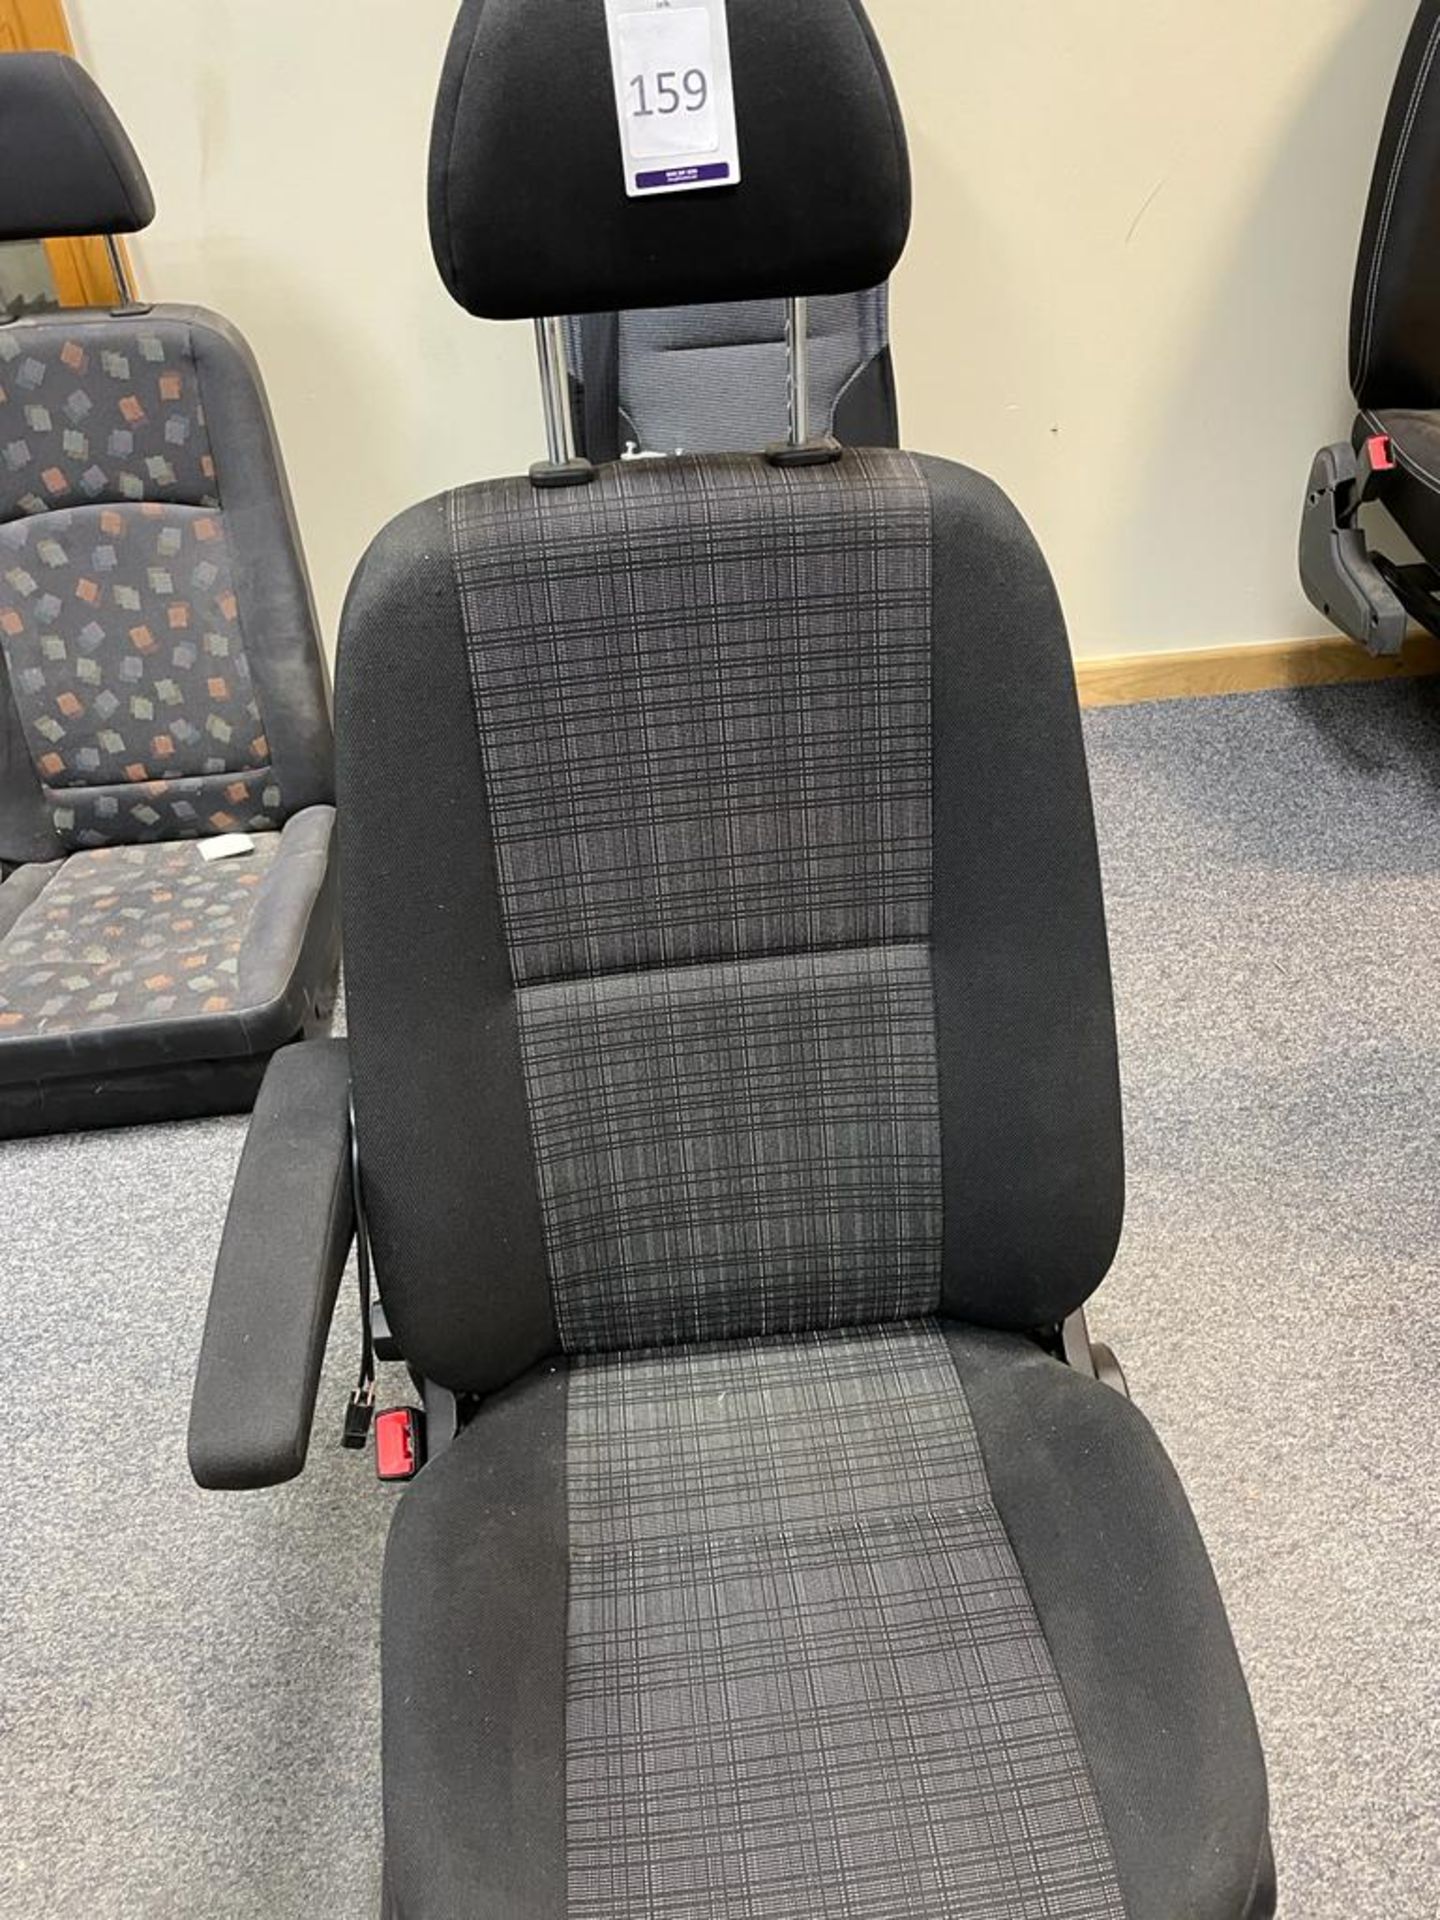 Mercedes Sprinter Passenger Seat (Location Dover. Please Refer to General Notes)